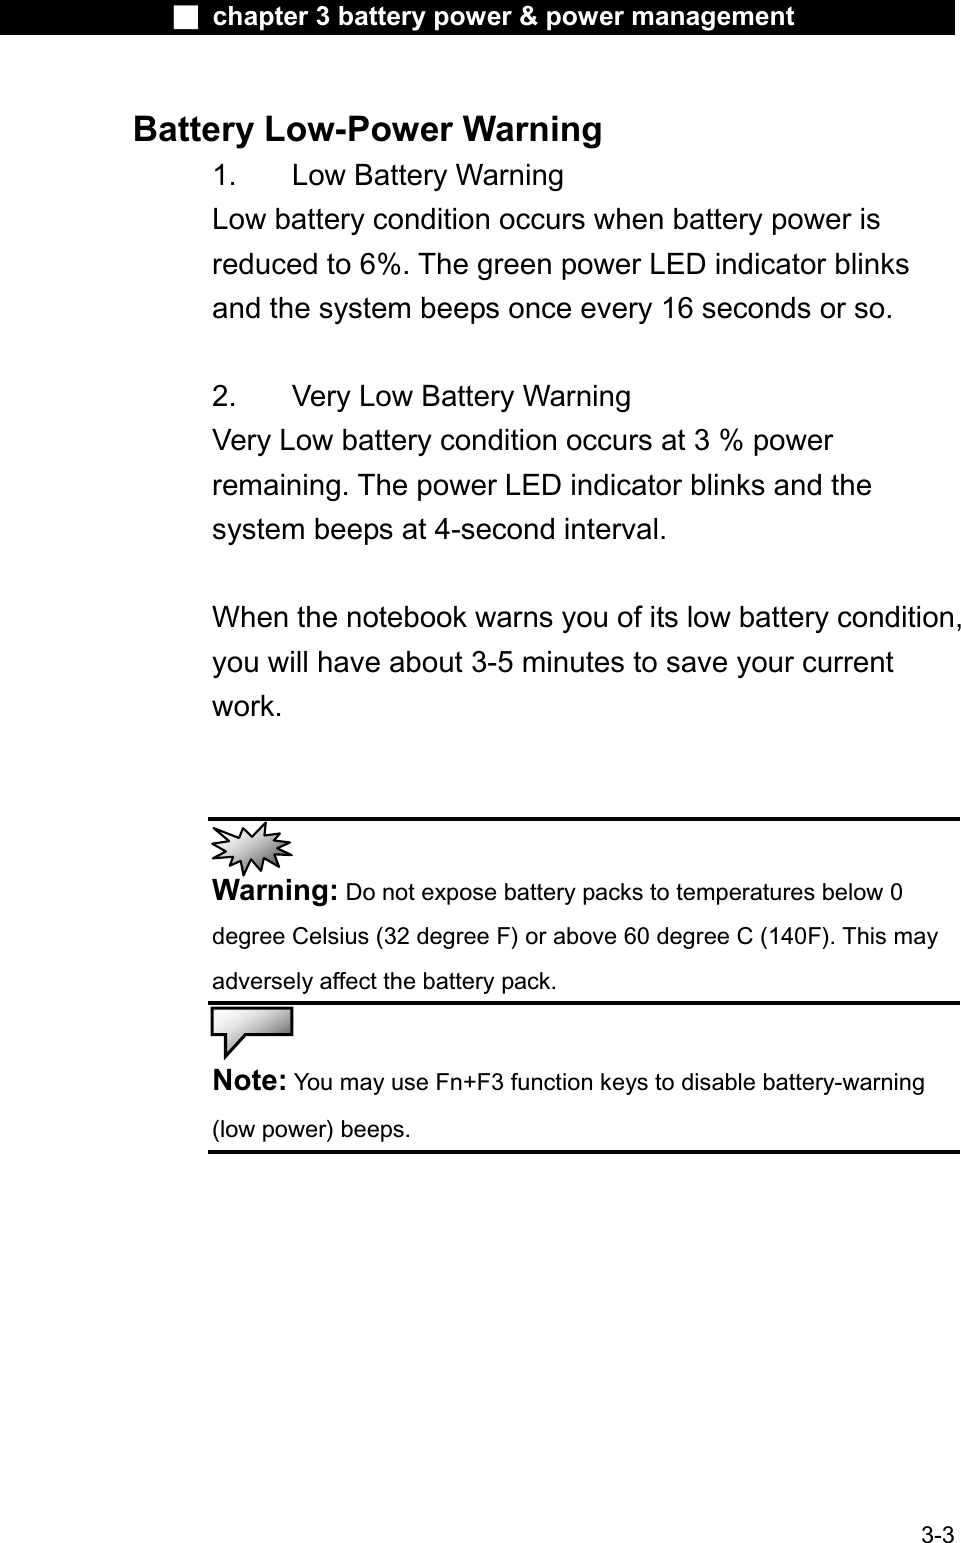 Ϯ chapter 3 battery power &amp; power managementBattery Low-Power Warning1. Low Battery WarningLow battery condition occurs when battery power is reduced to 6%. The green power LED indicator blinksand the system beeps once every 16 seconds or so.2. Very Low Battery WarningVery Low battery condition occurs at 3 % powerremaining. The power LED indicator blinks and the system beeps at 4-second interval. When the notebook warns you of its low battery condition,you will have about 3-5 minutes to save your currentwork.Warning: Do not expose battery packs to temperatures below 0 degree Celsius (32 degree F) or above 60 degree C (140F). This mayadversely affect the battery pack.Note: You may use Fn+F3 function keys to disable battery-warning(low power) beeps.3-3